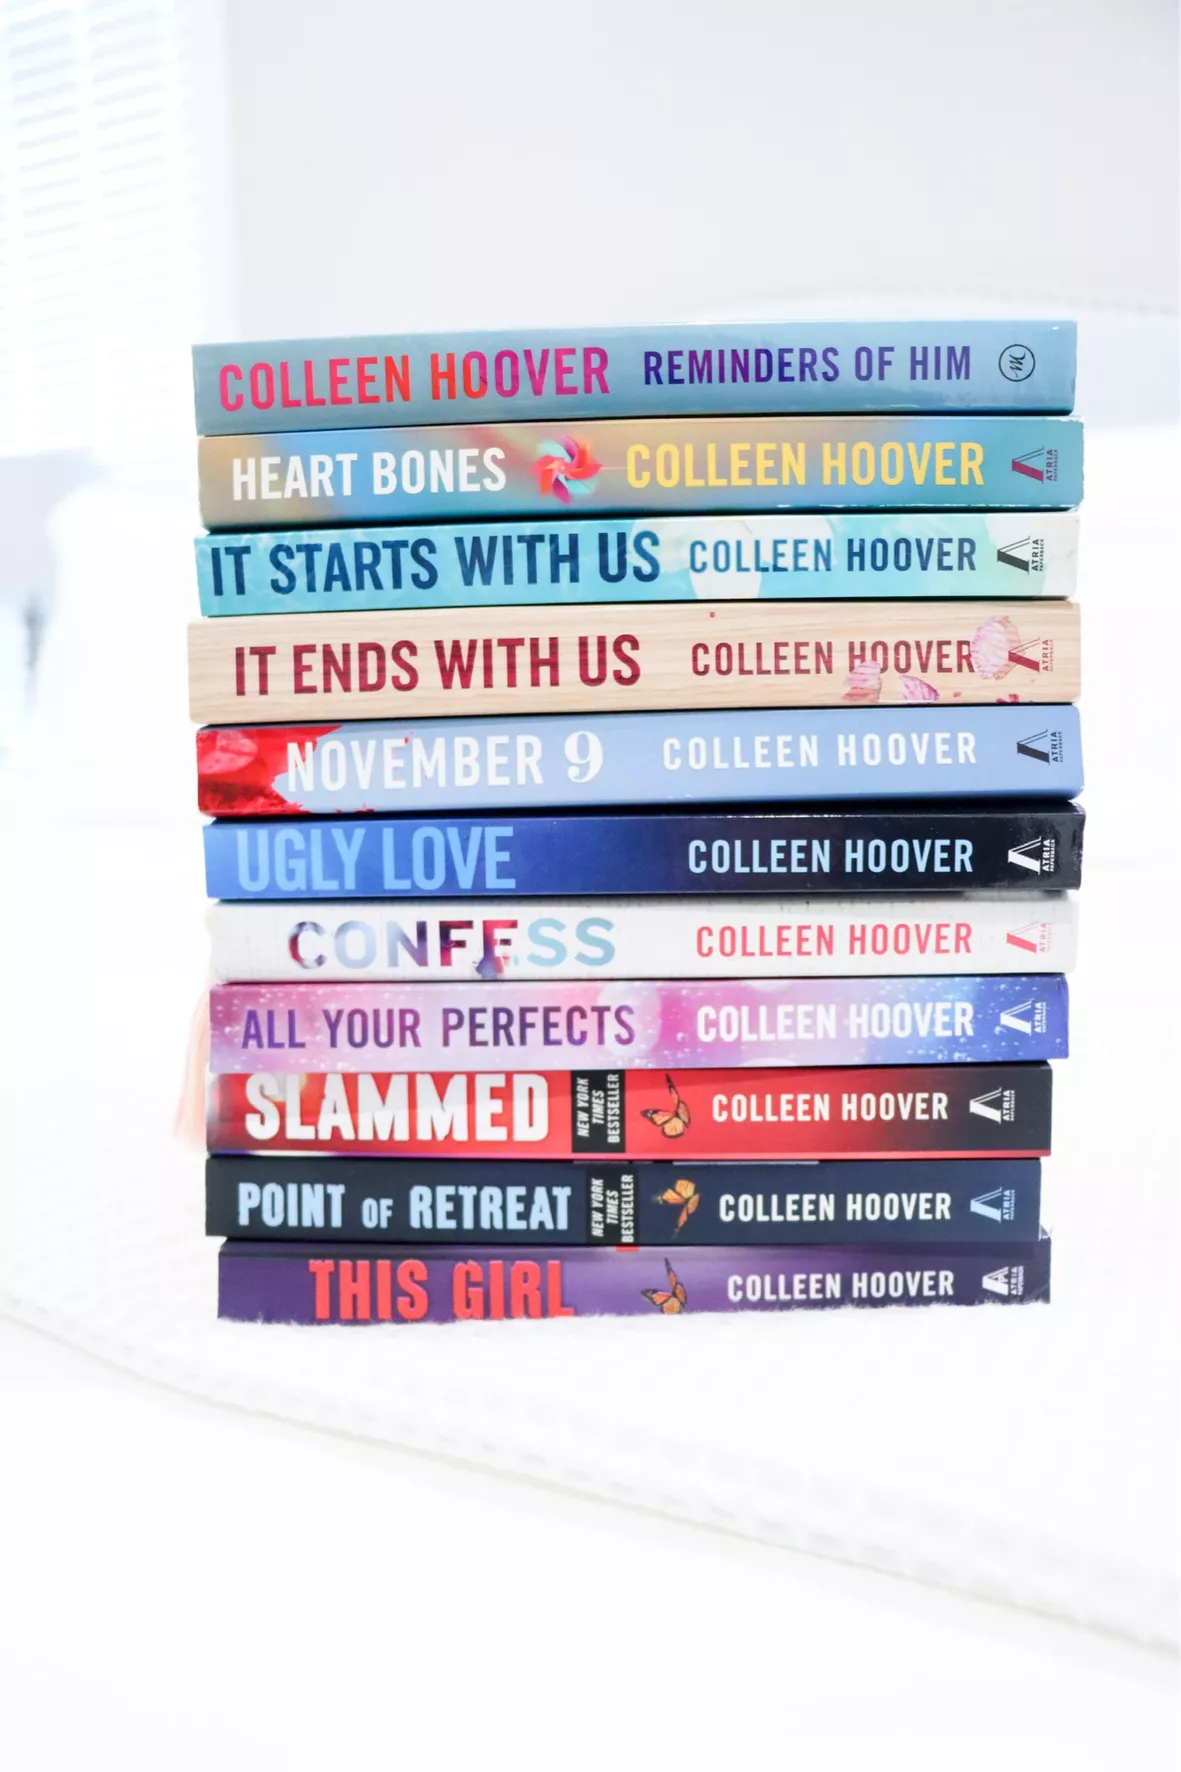 November 9 It Ends With Us : Colleen Hoover 2 Books Set (English, Paperback)